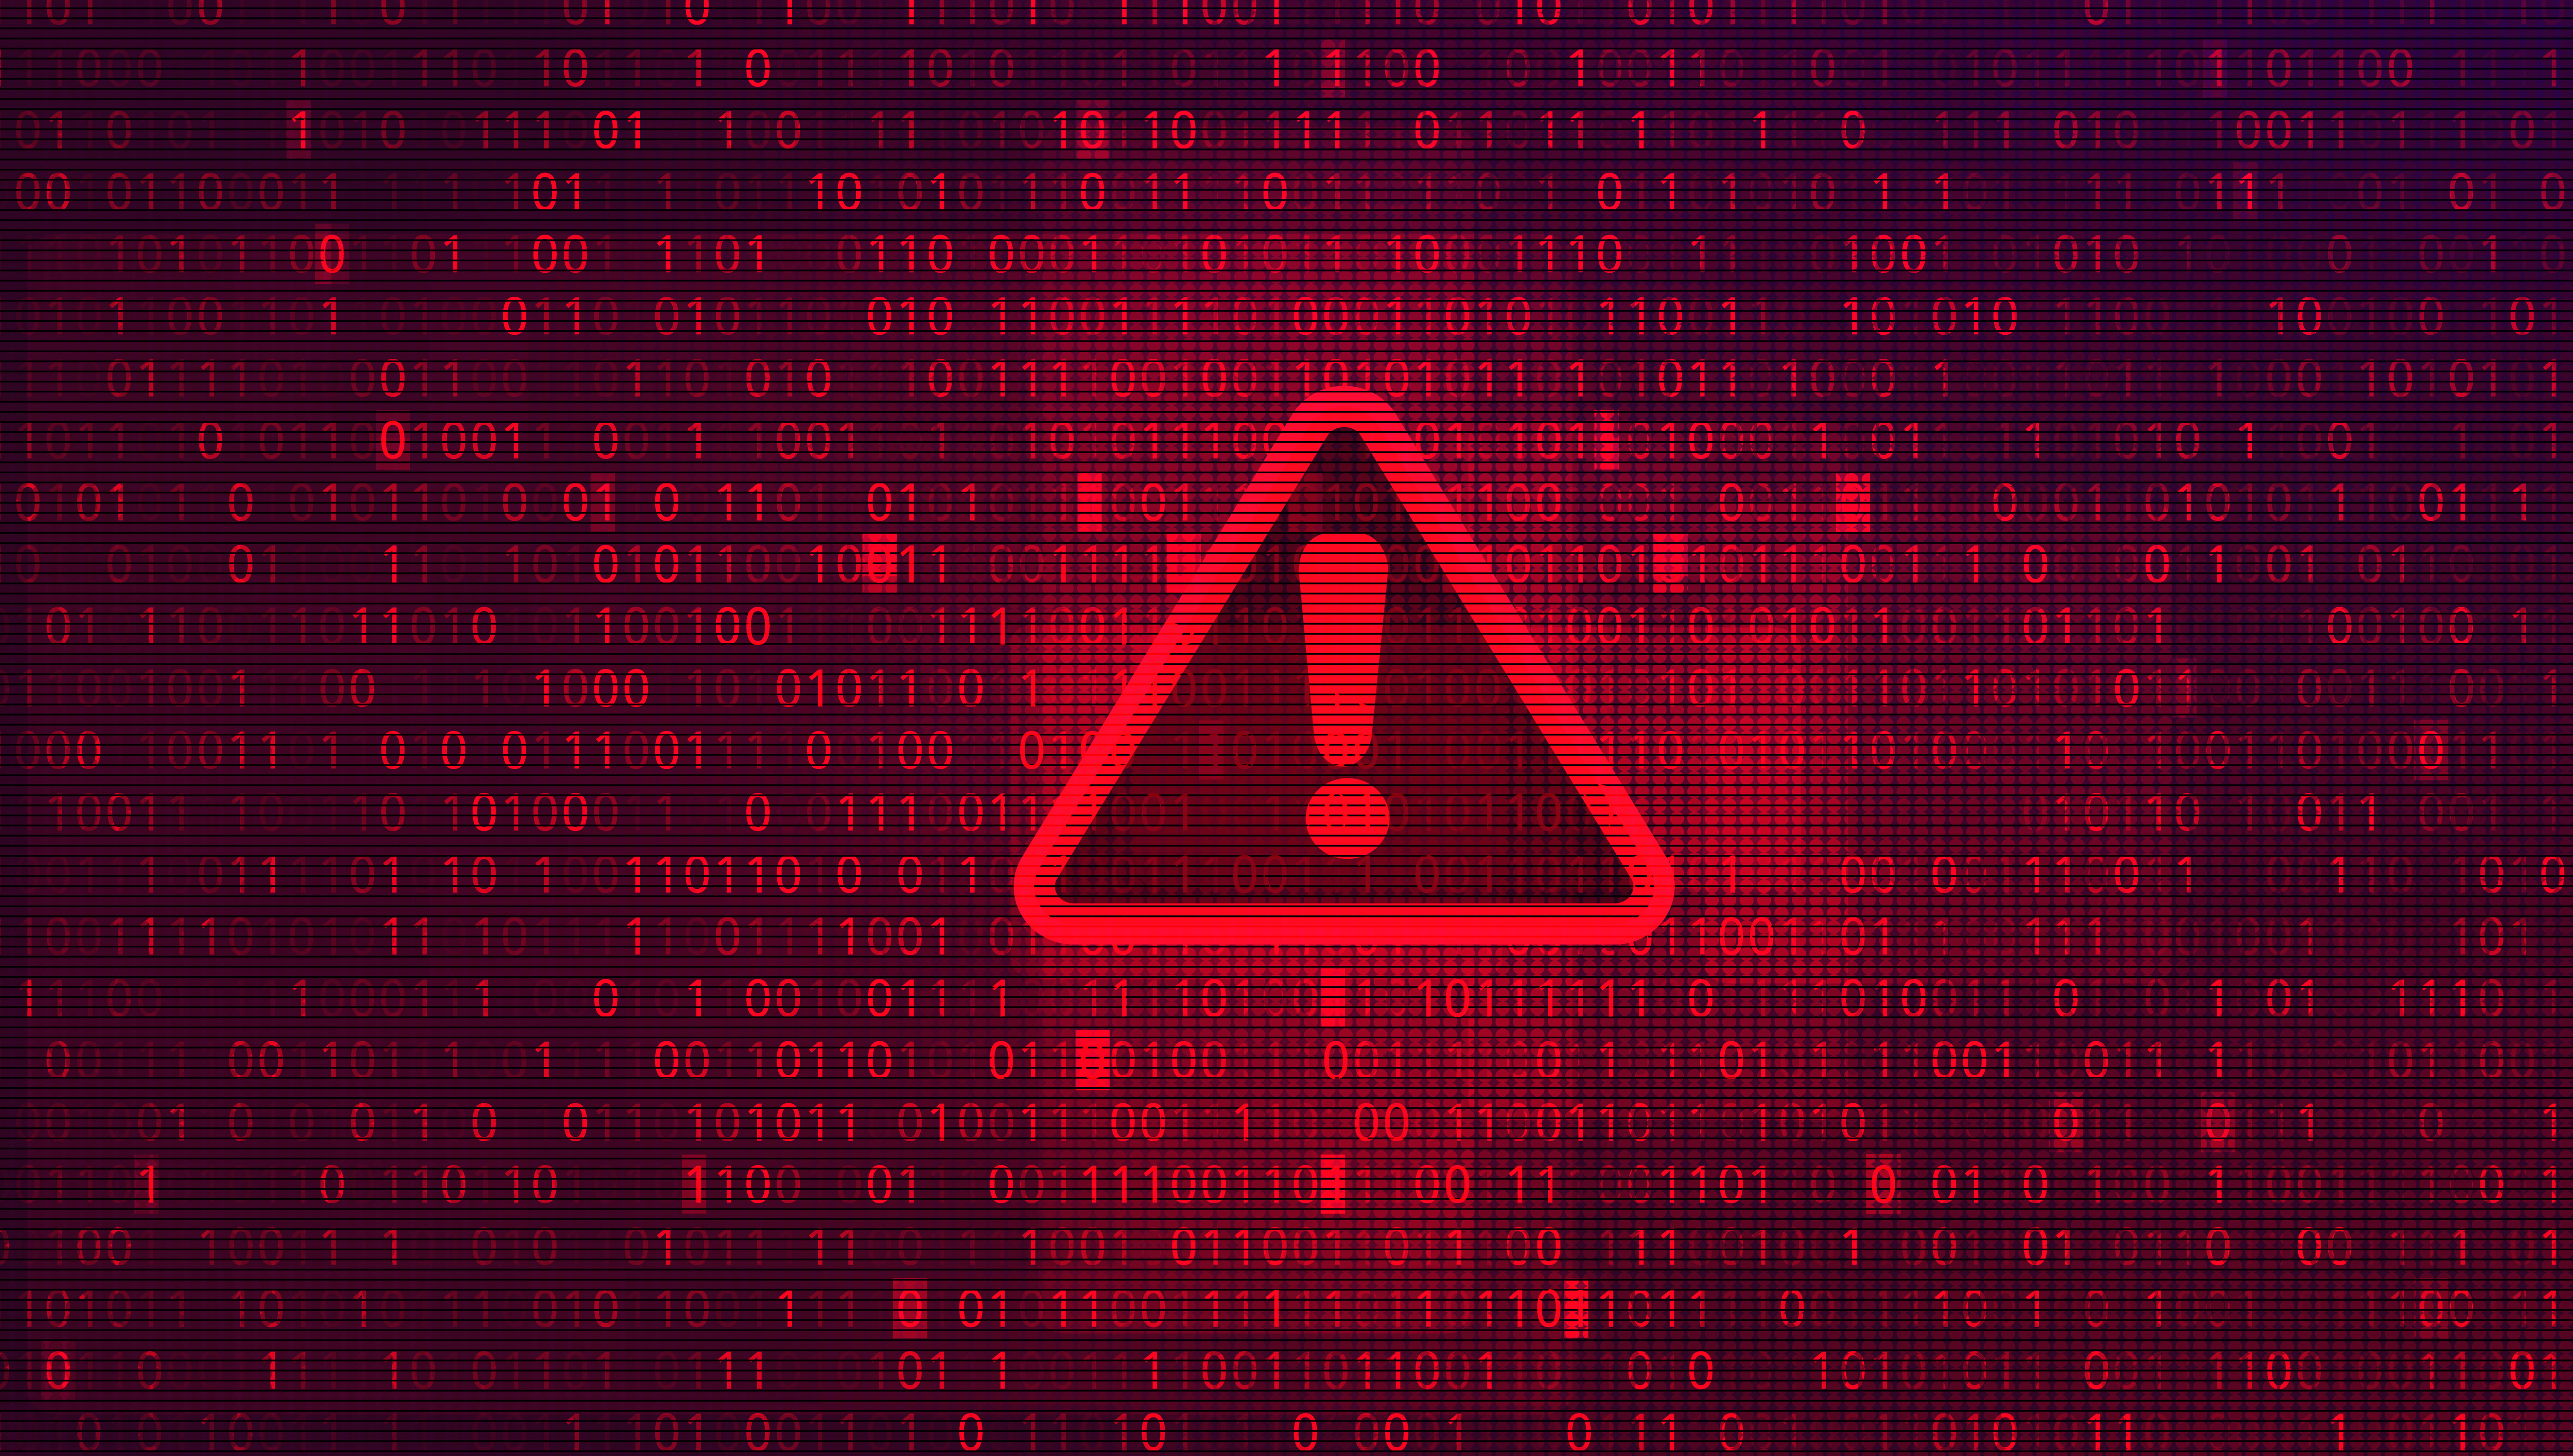 From Dark Reading – Simpson Manufacturing Launches Investigation After Cyberattack